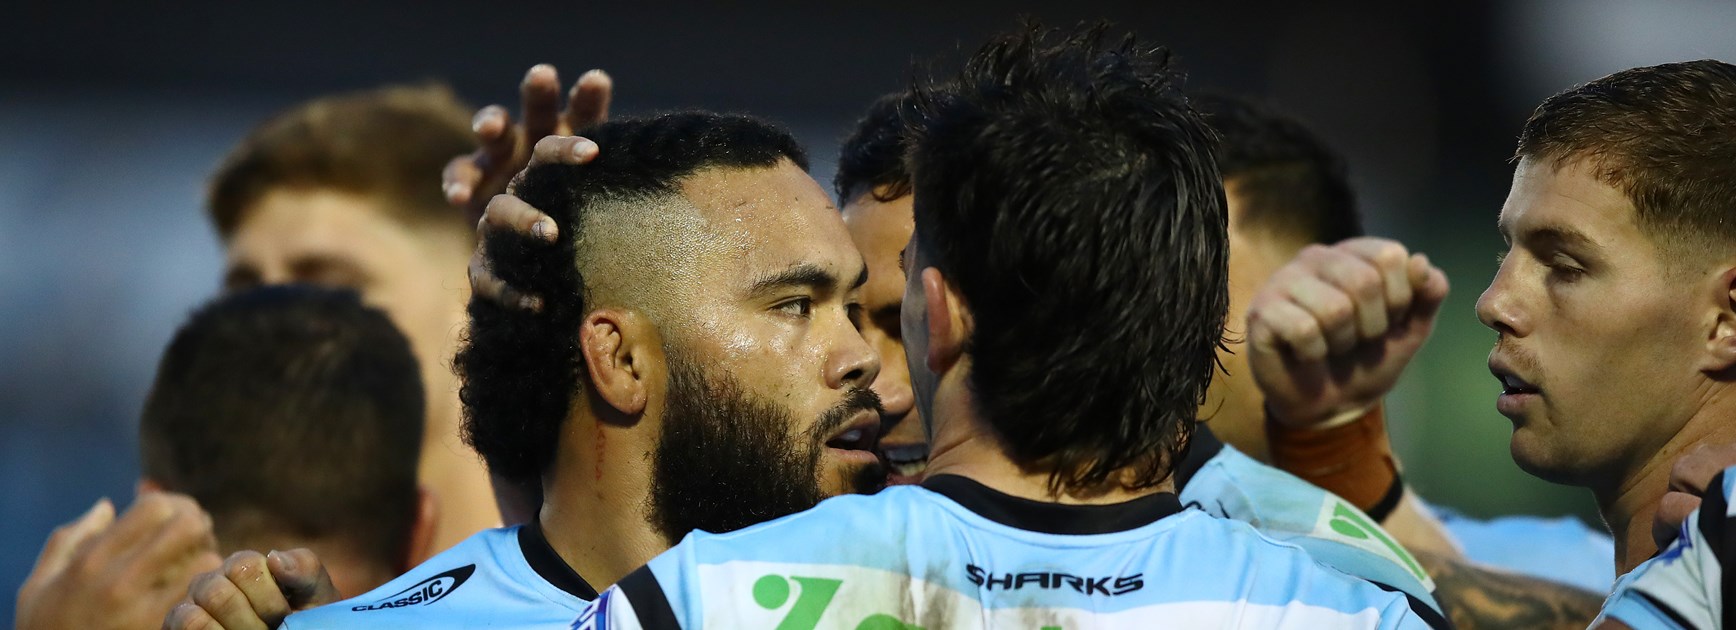 Sharks down Dragons to stay top of table